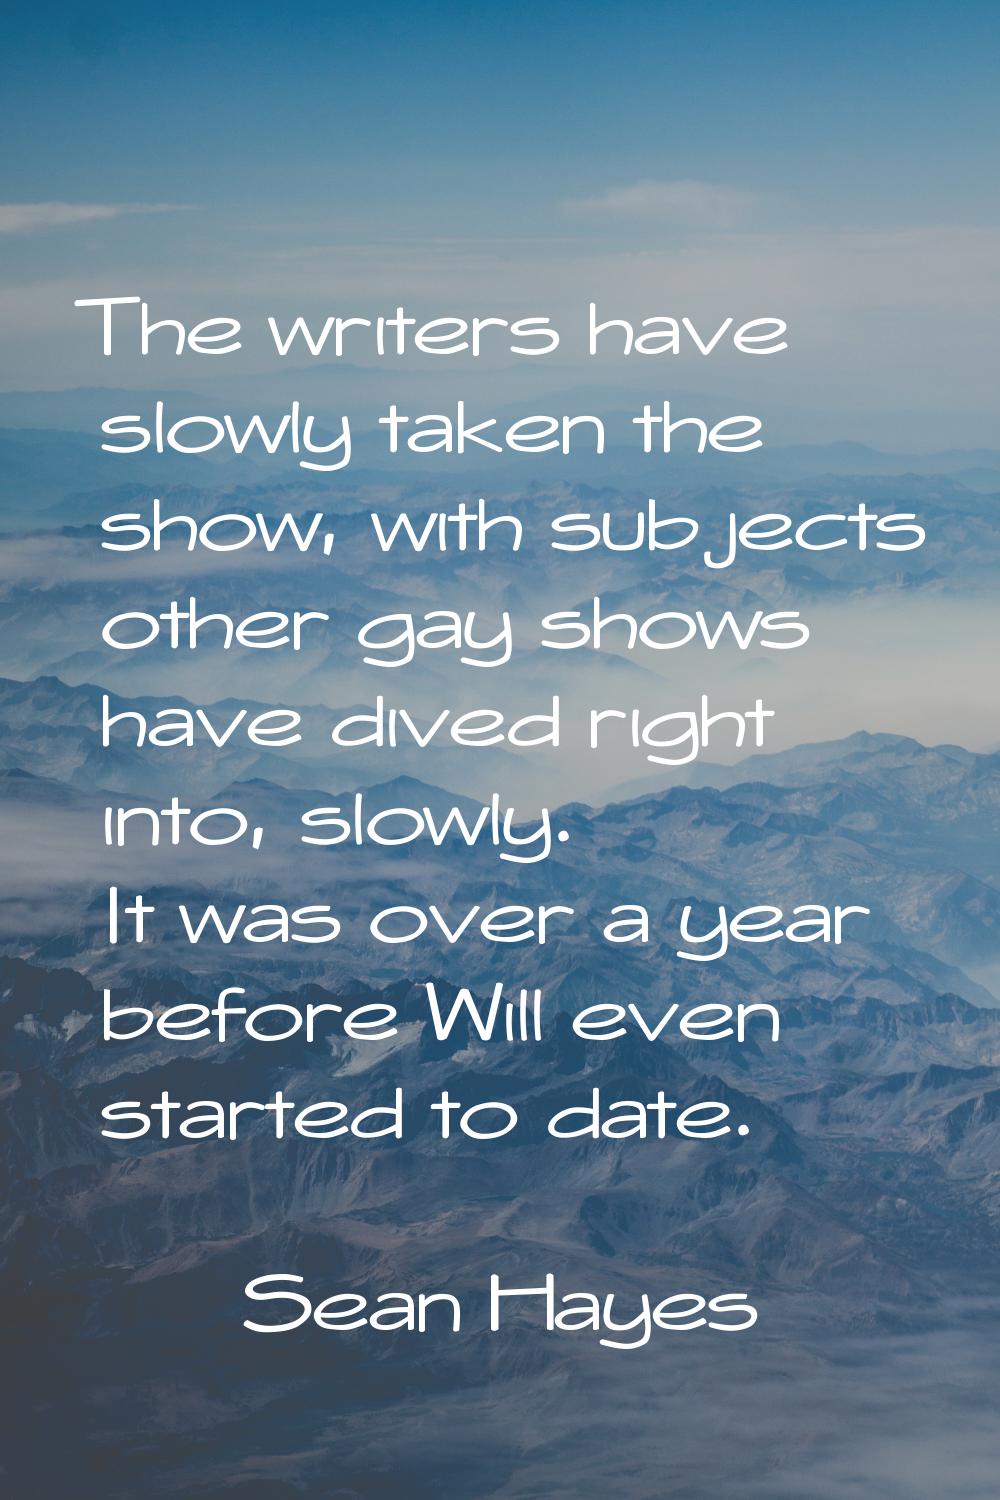 The writers have slowly taken the show, with subjects other gay shows have dived right into, slowly